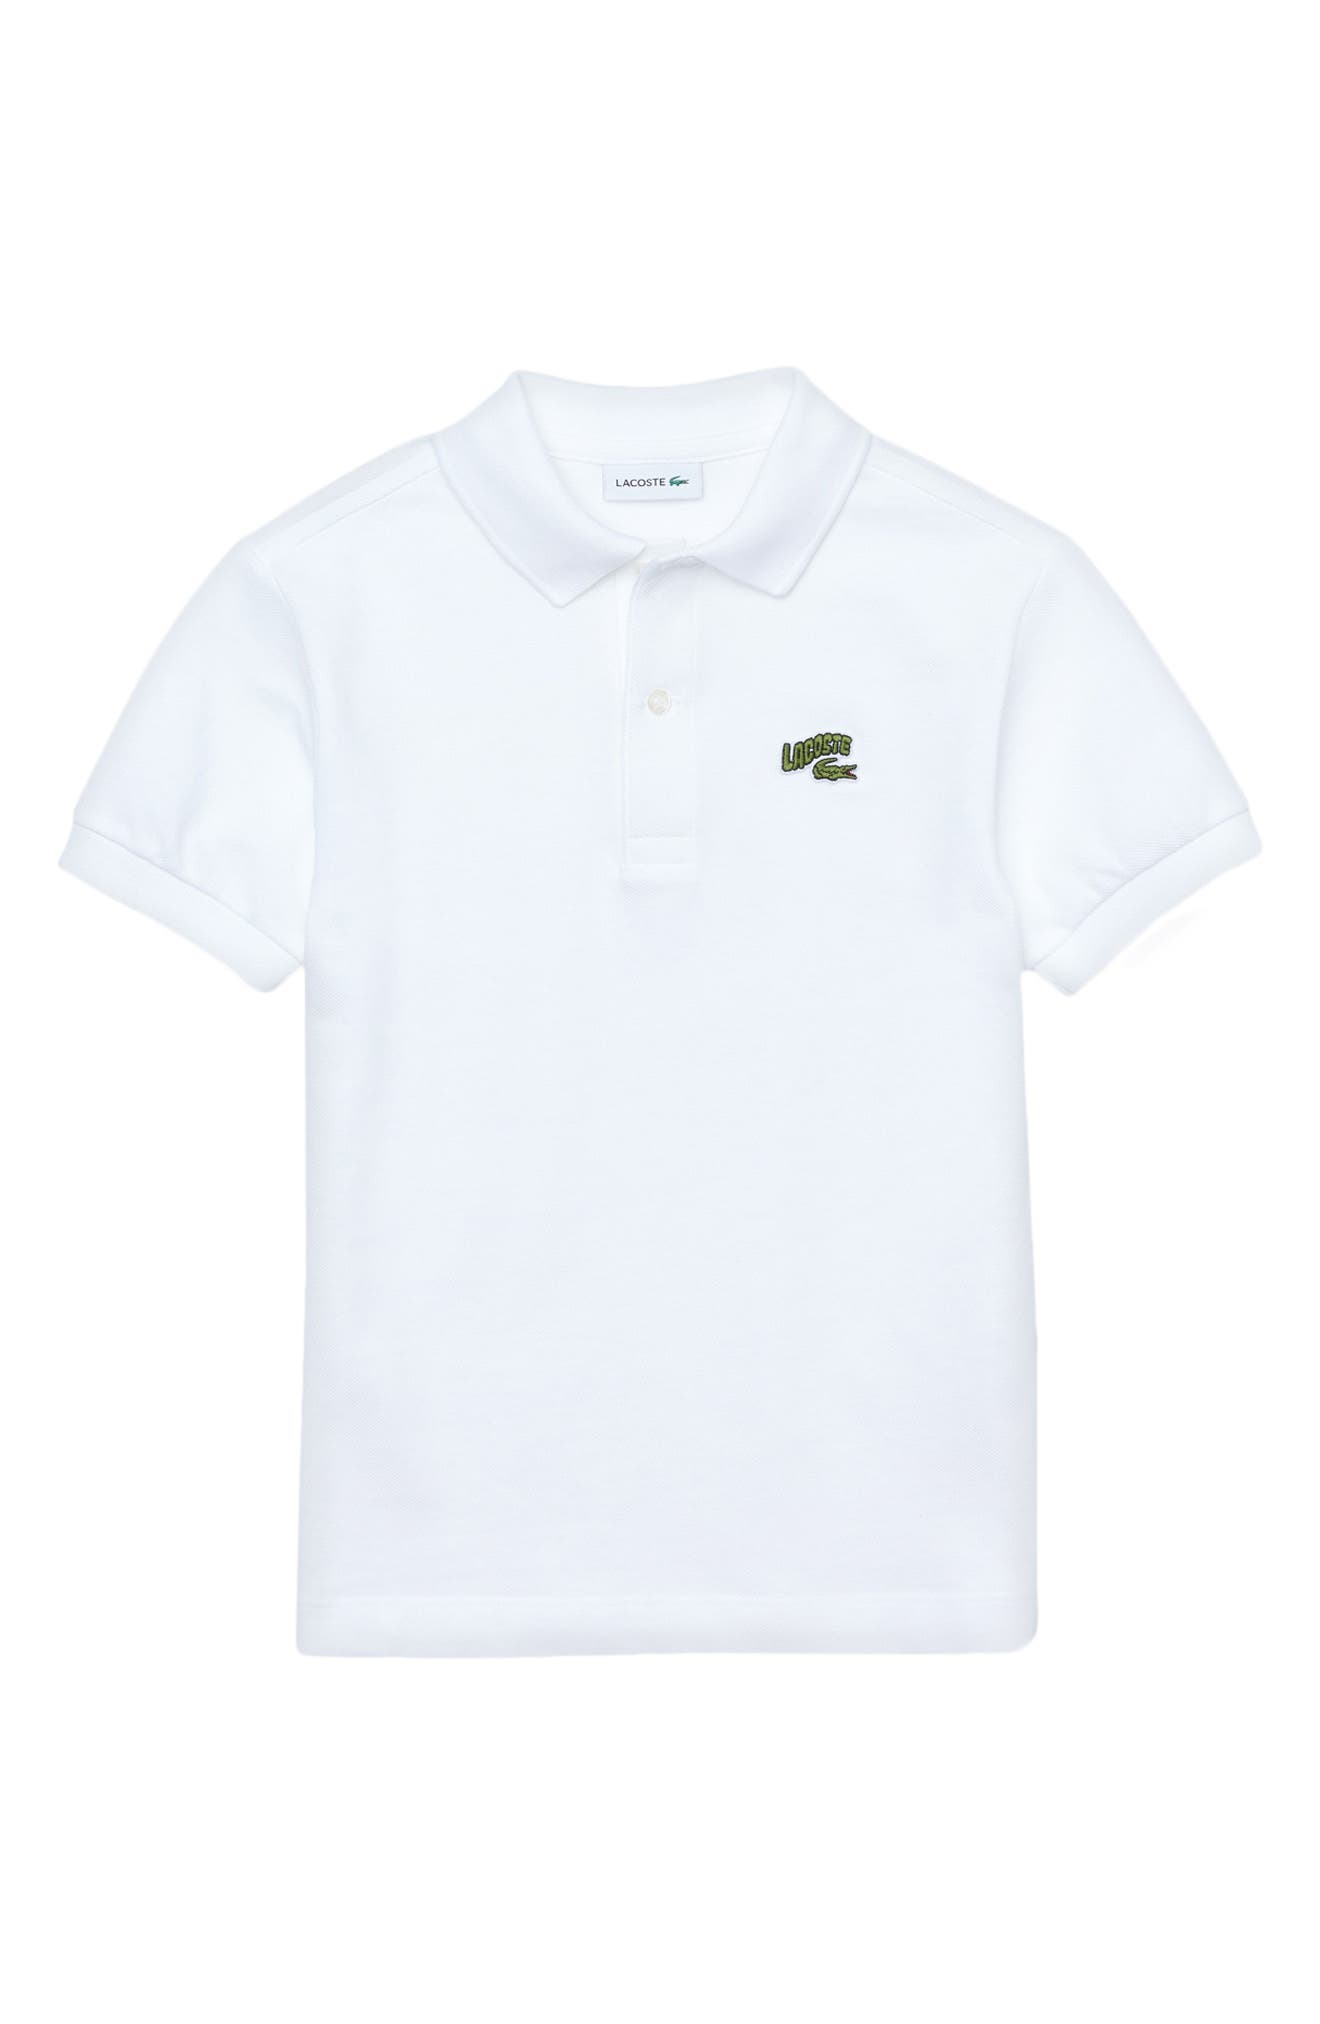 discount lacoste clothing